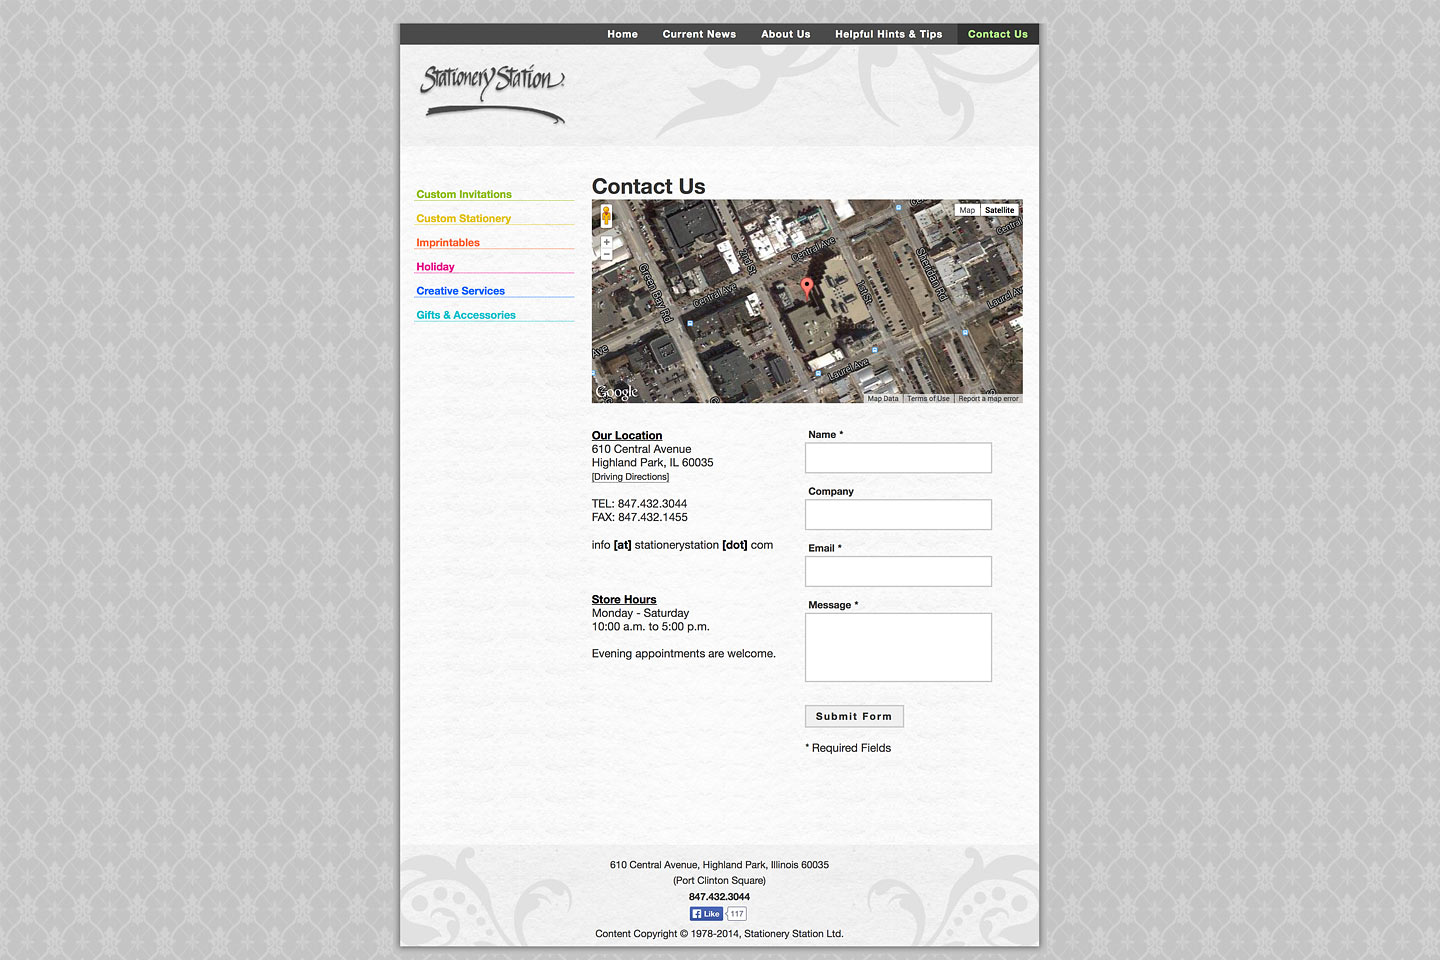 a screen capture of the stationery station contact us page, designed and developed by 4d, inc